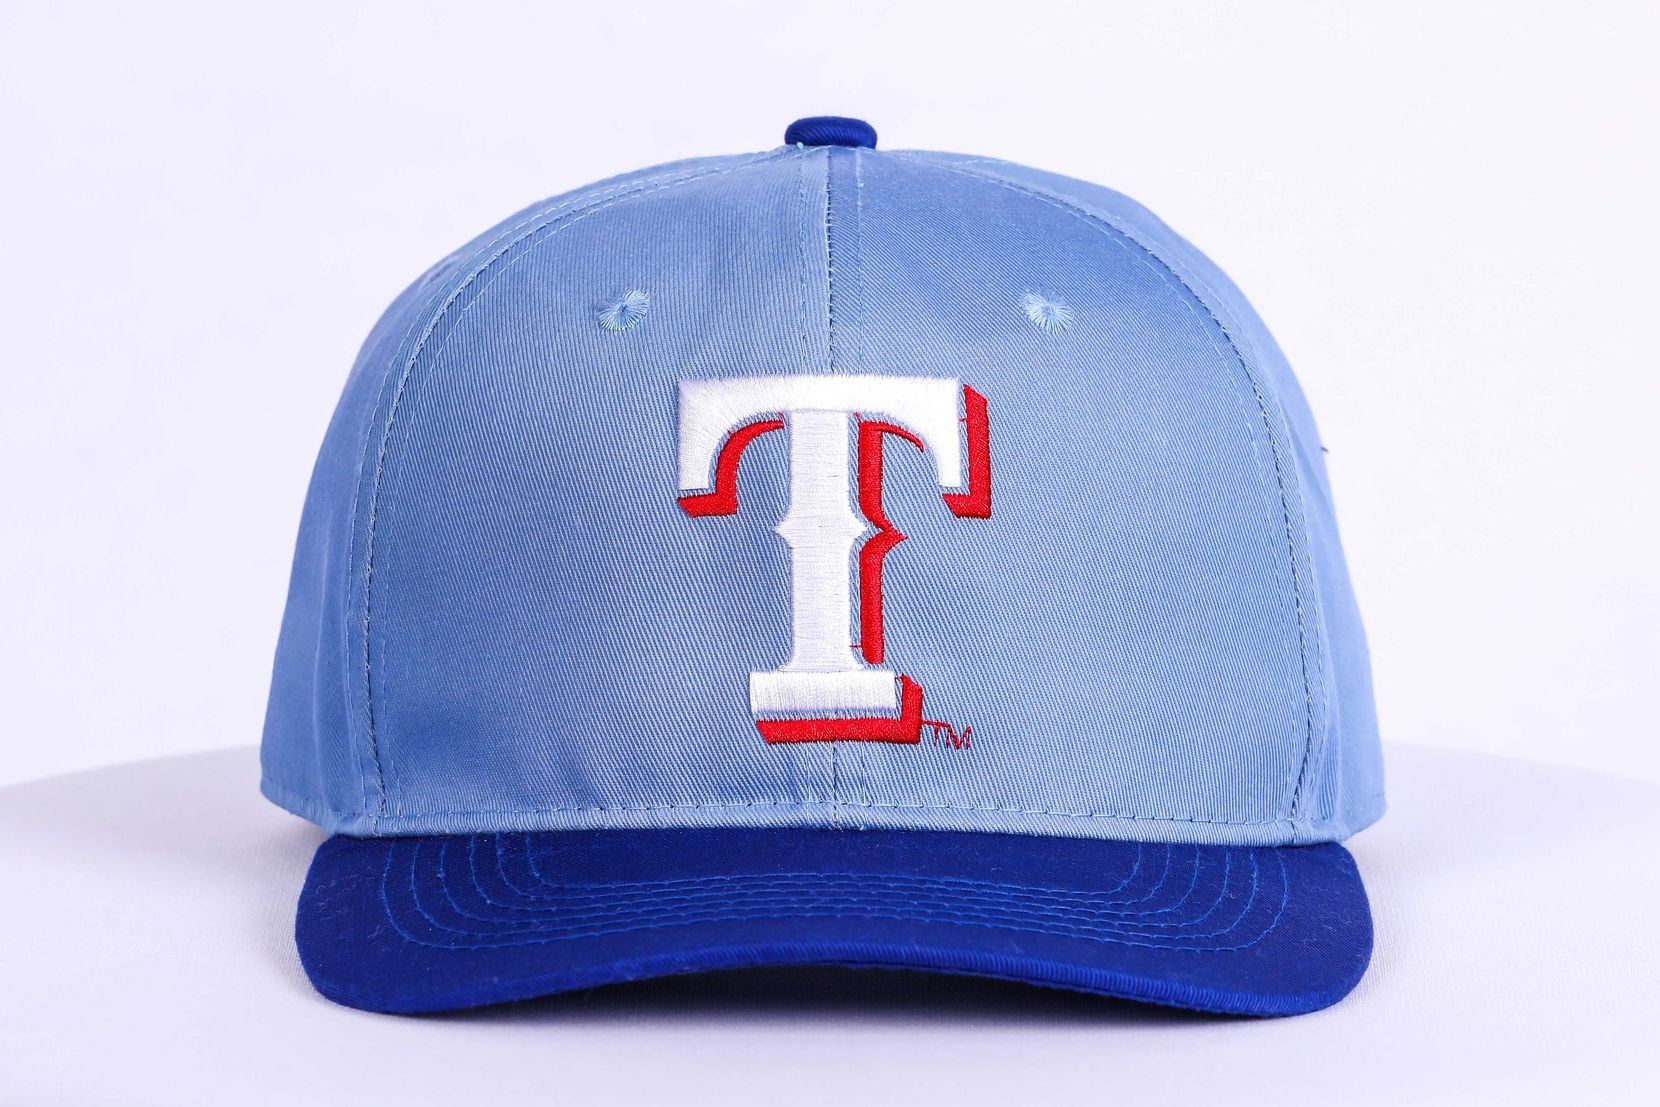 Replica hat to be handed out May 17.